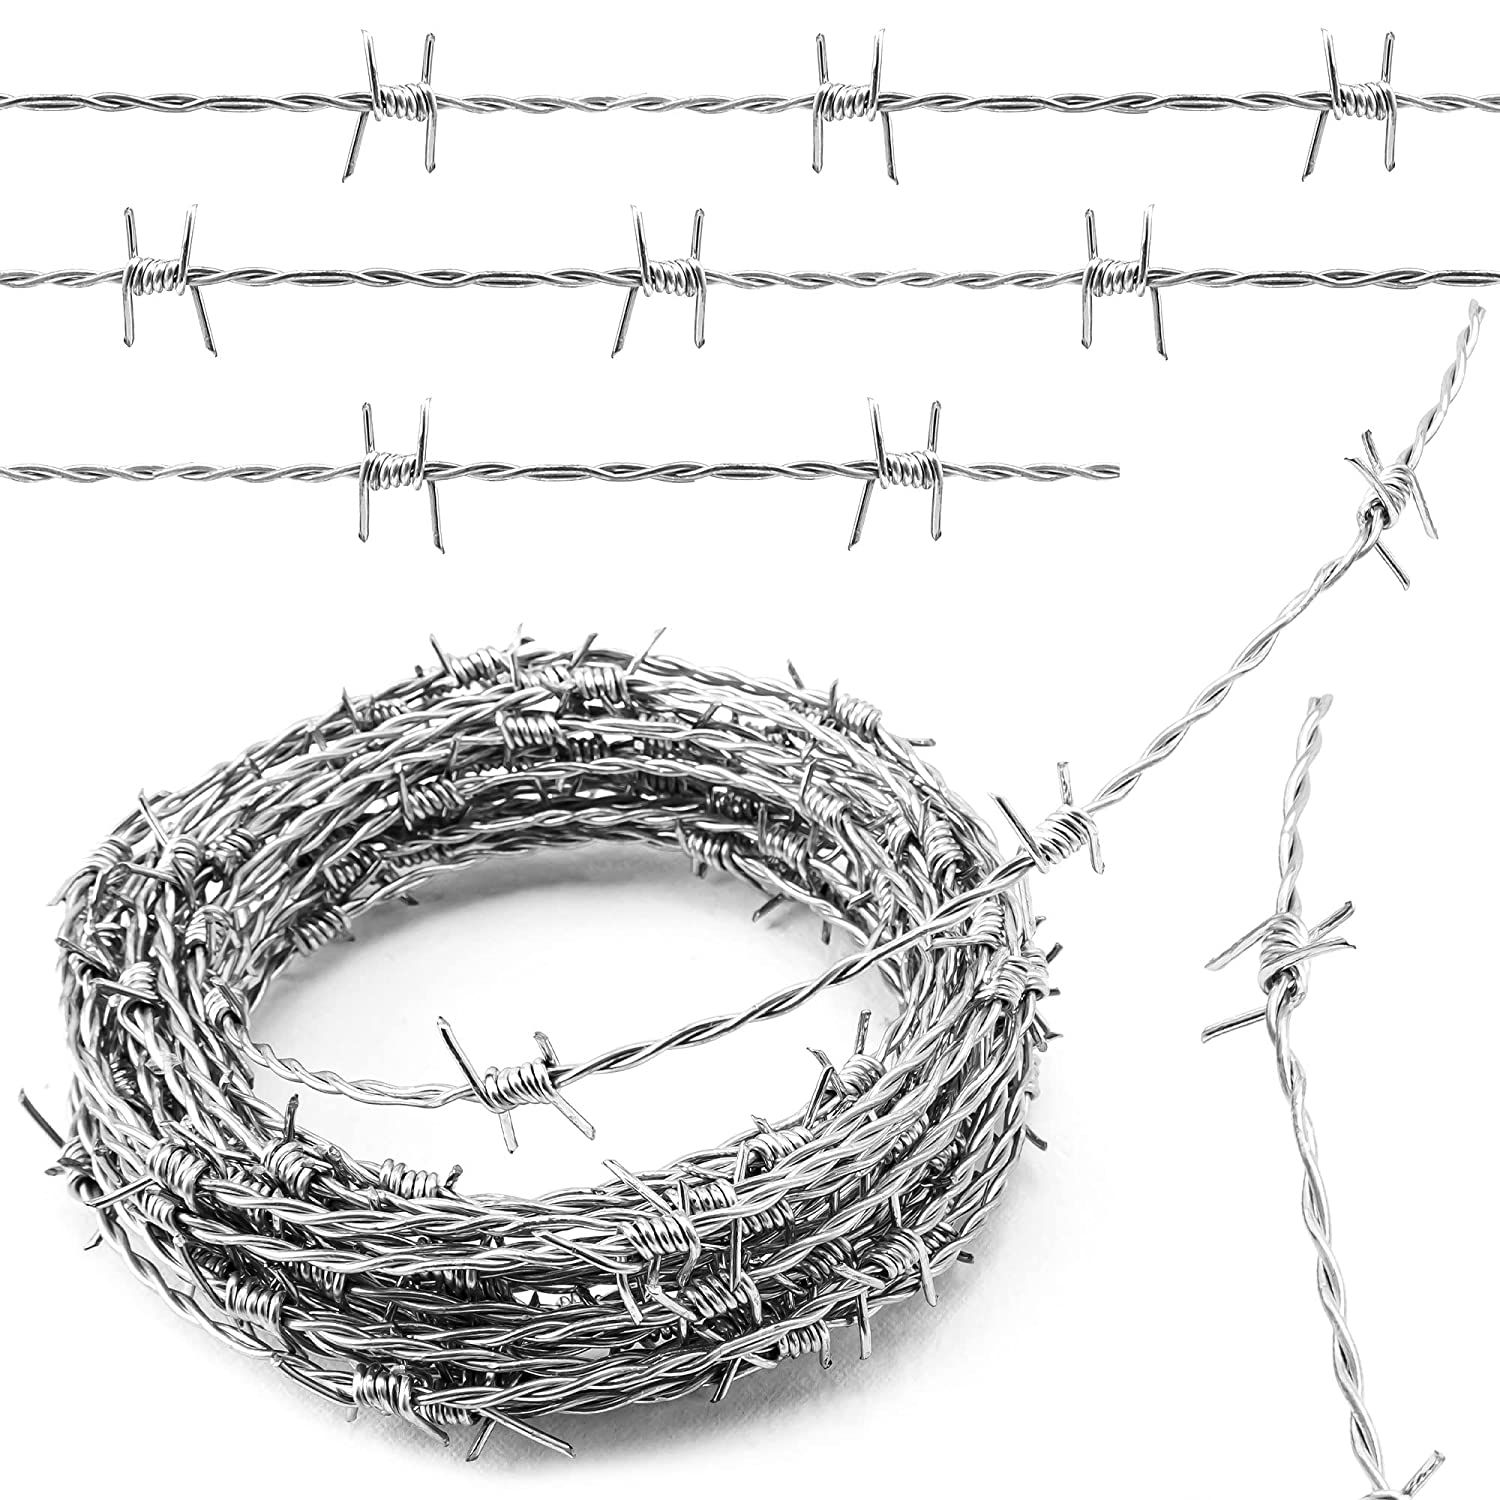 Anti-theft Barb Wire Mesh Fence Roll Galvanized Iron Barbed Wire 500 Meters For Fence